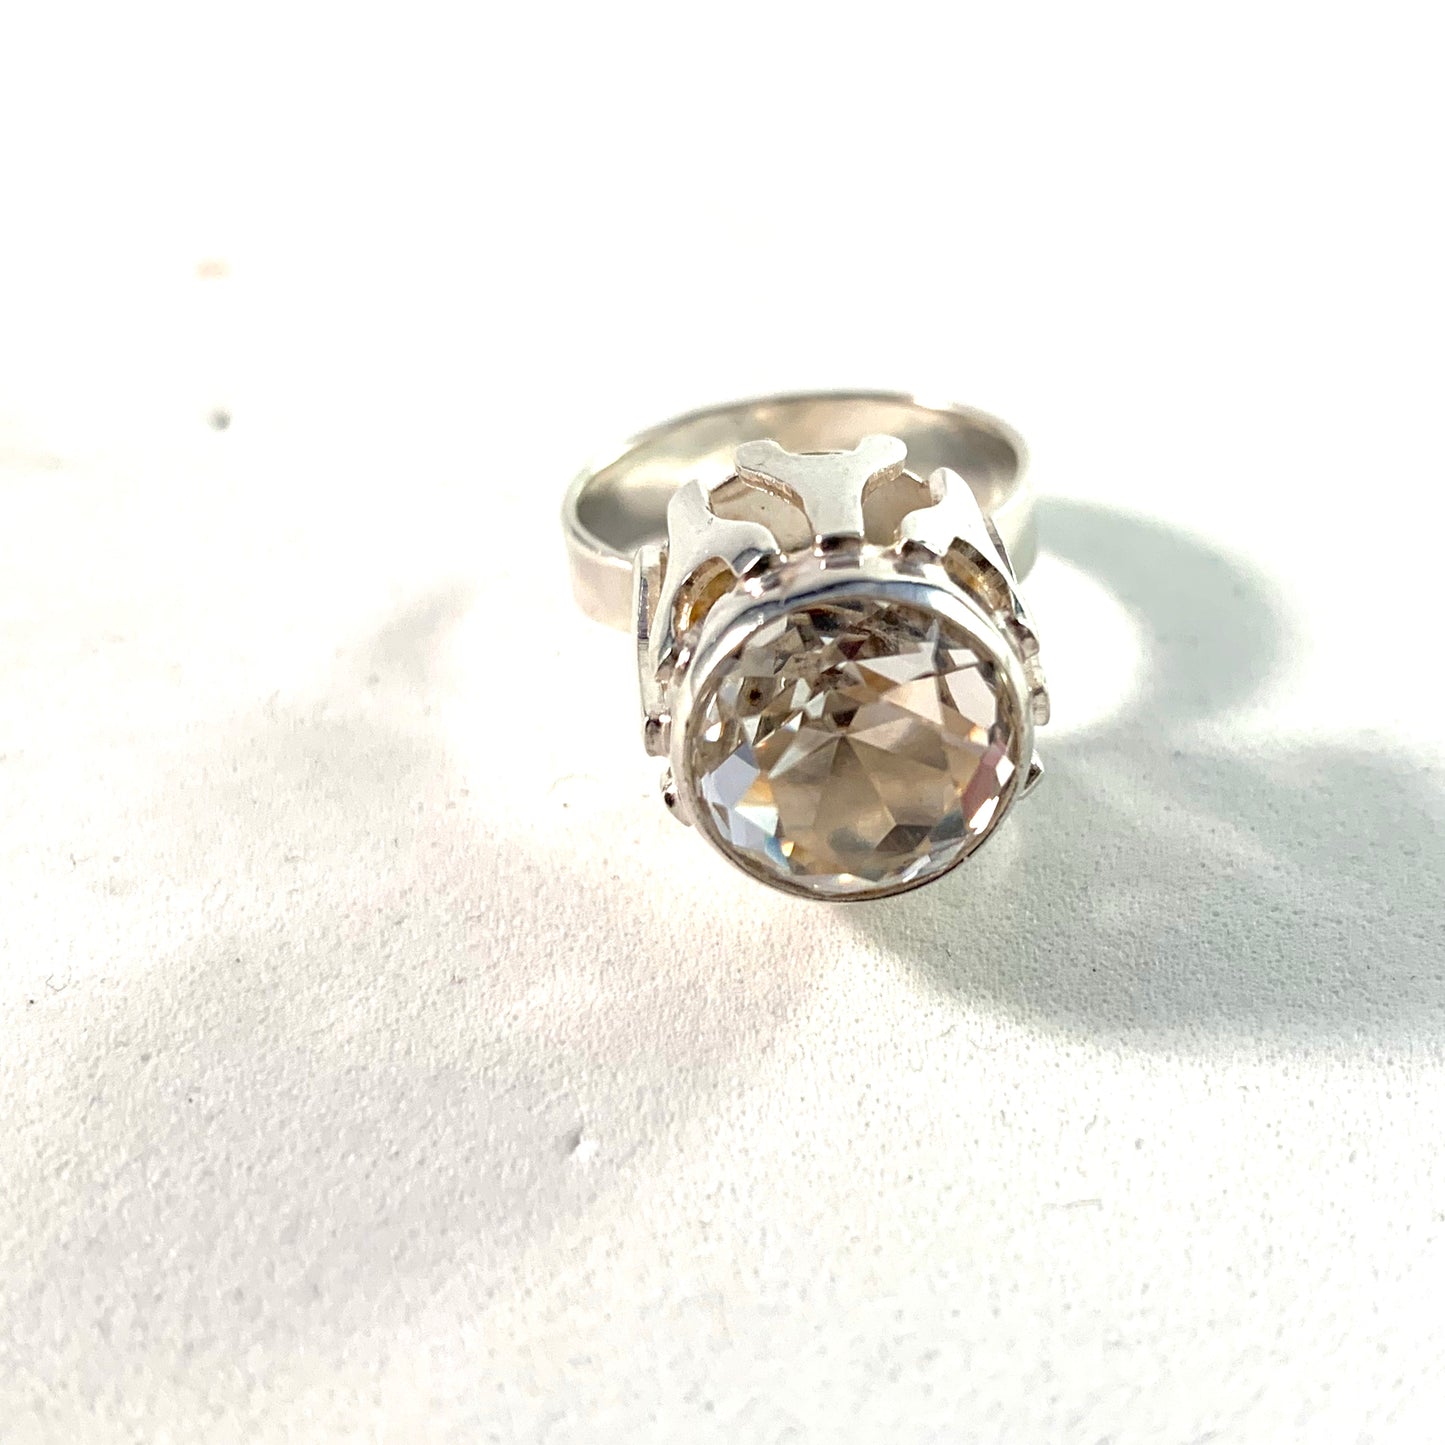 Germany 1960s Modernist 835 Silver Rock Crystal Ring.